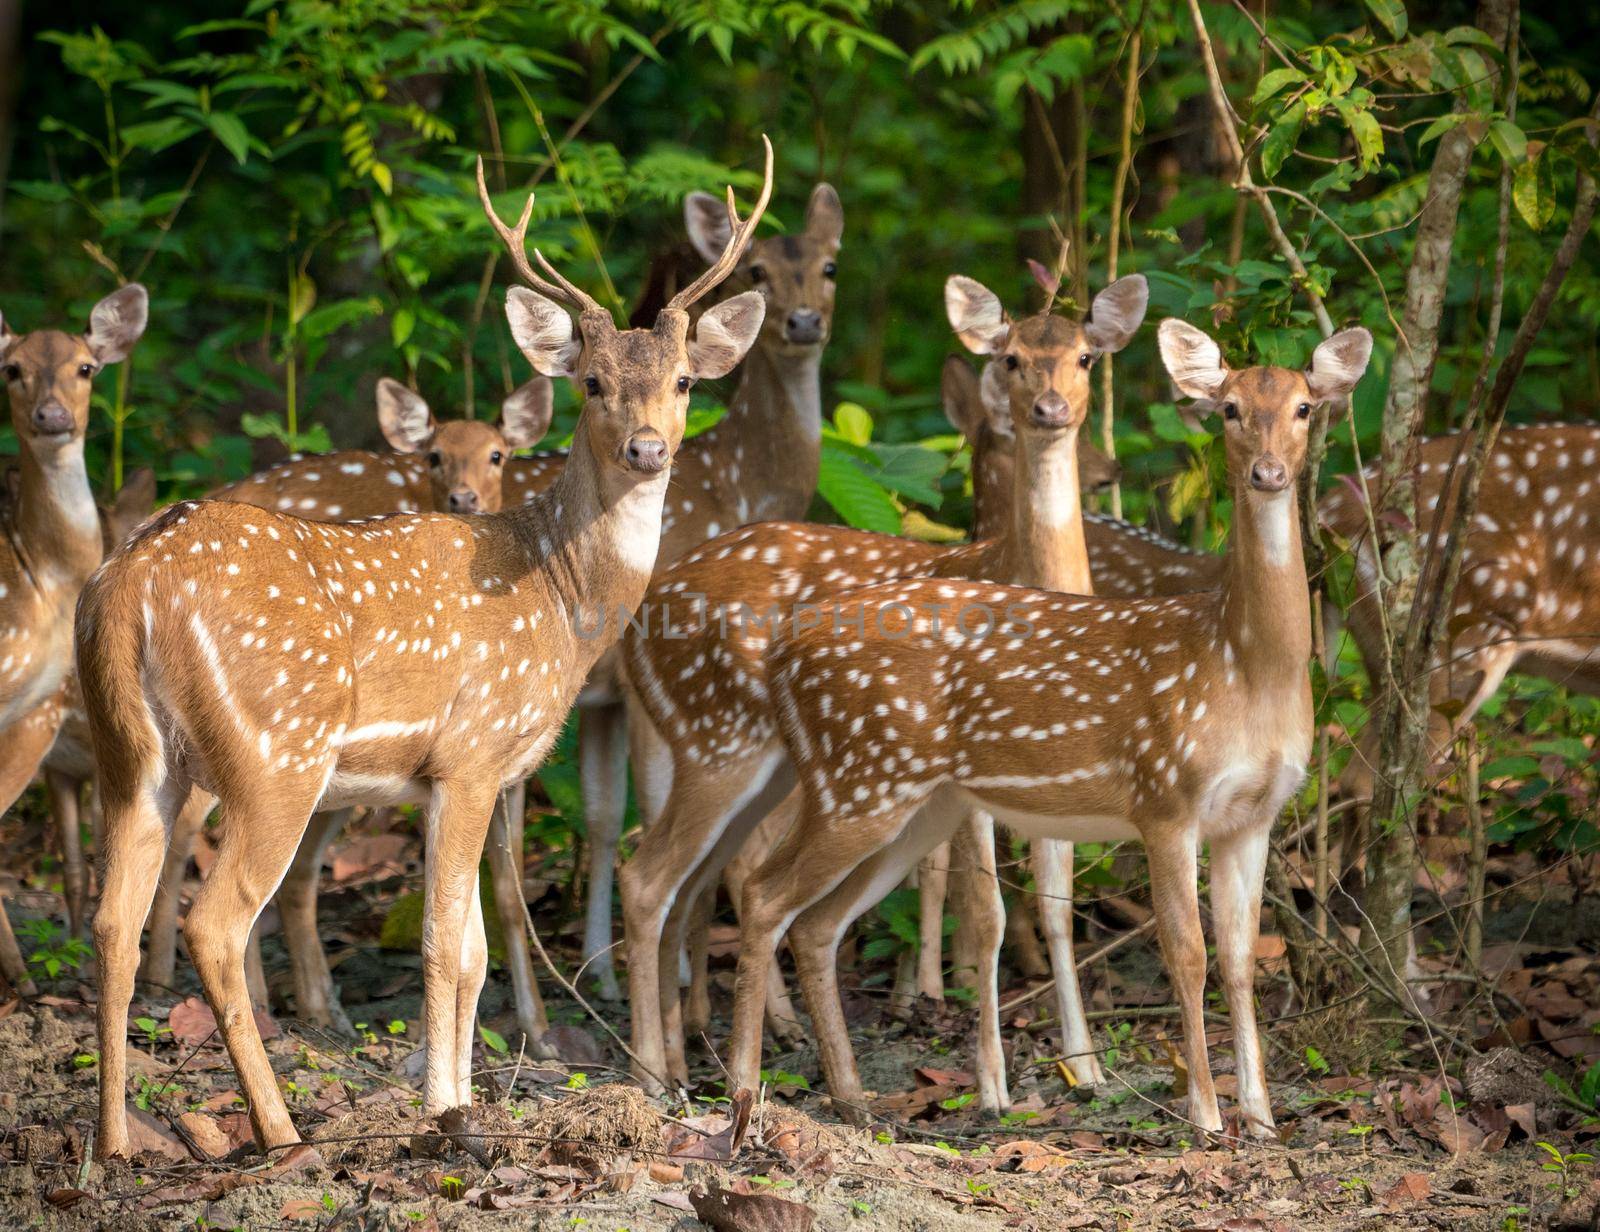 Sika or spotted deers herd in the jungle by Arsgera